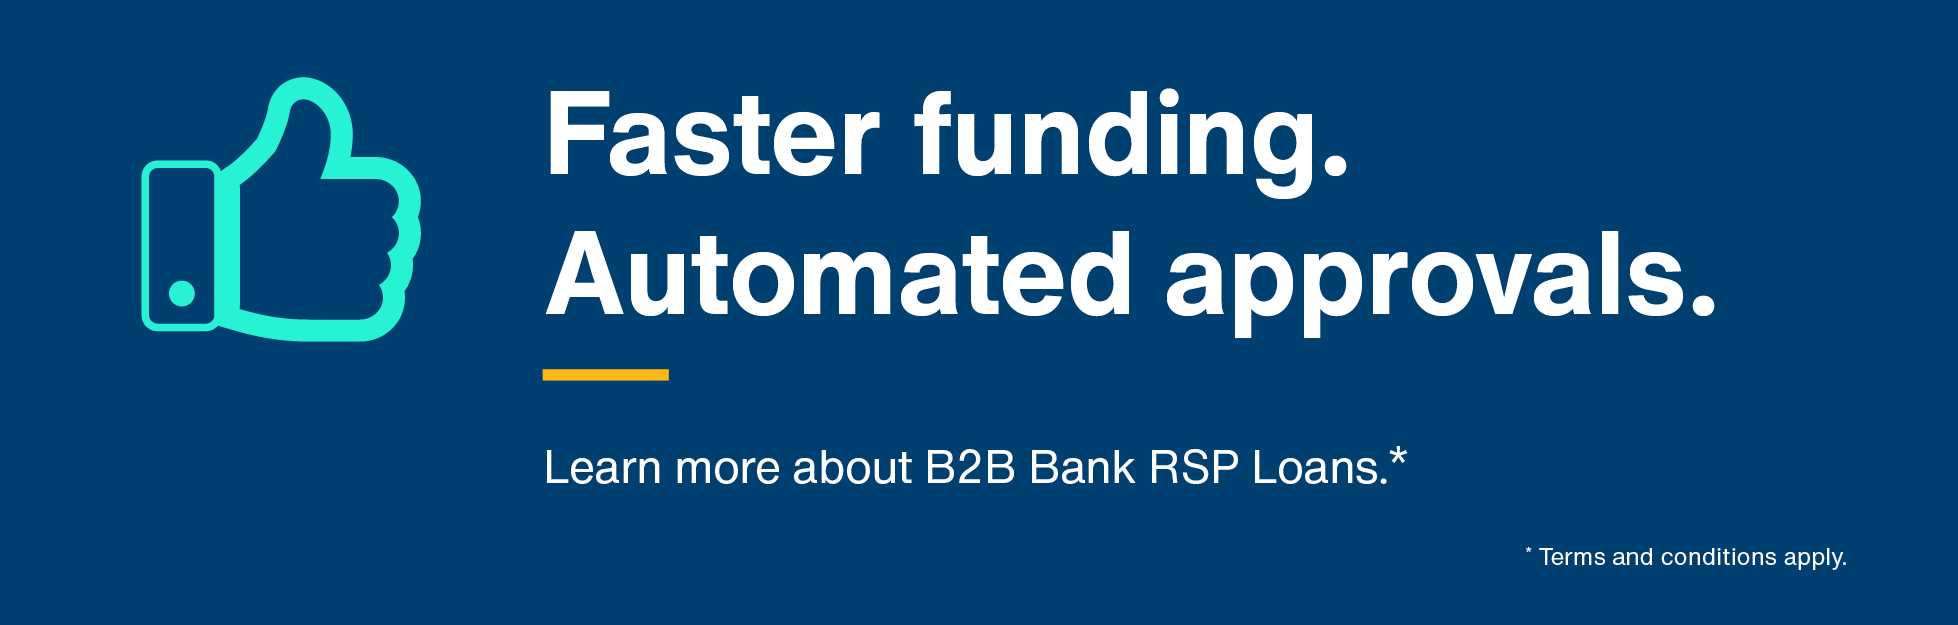 Faster funding. Automated approvals. Learn more about B2B Bank RSP Loans. Terms and conditions apply.